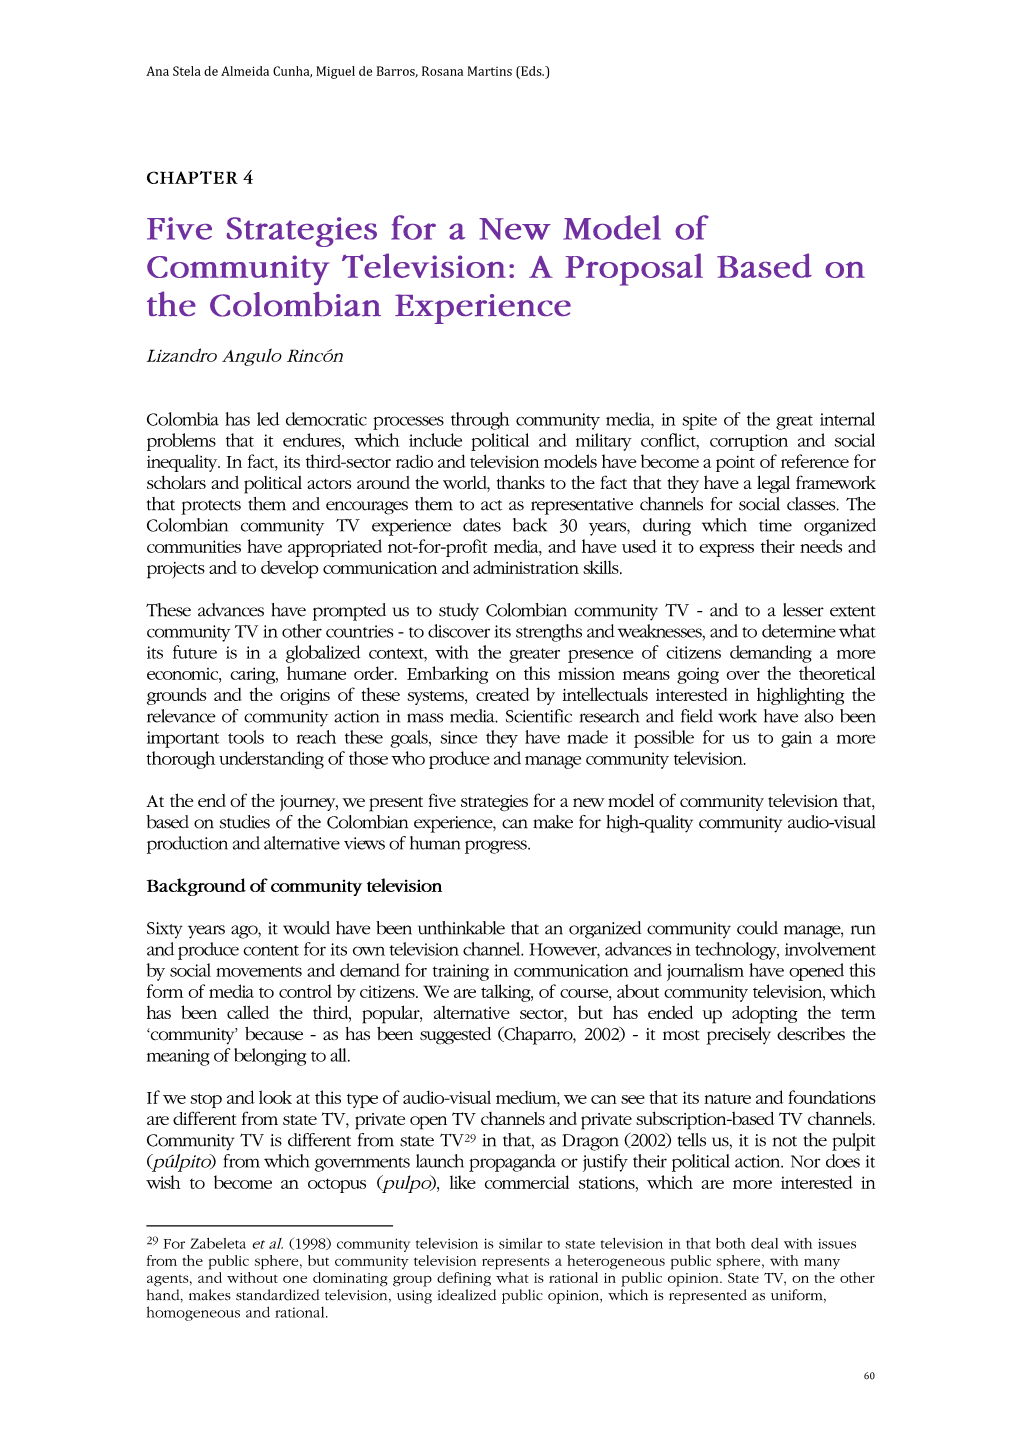 Five Strategies for a New Model of Community Television: a Proposal Based on the Colombian Experience